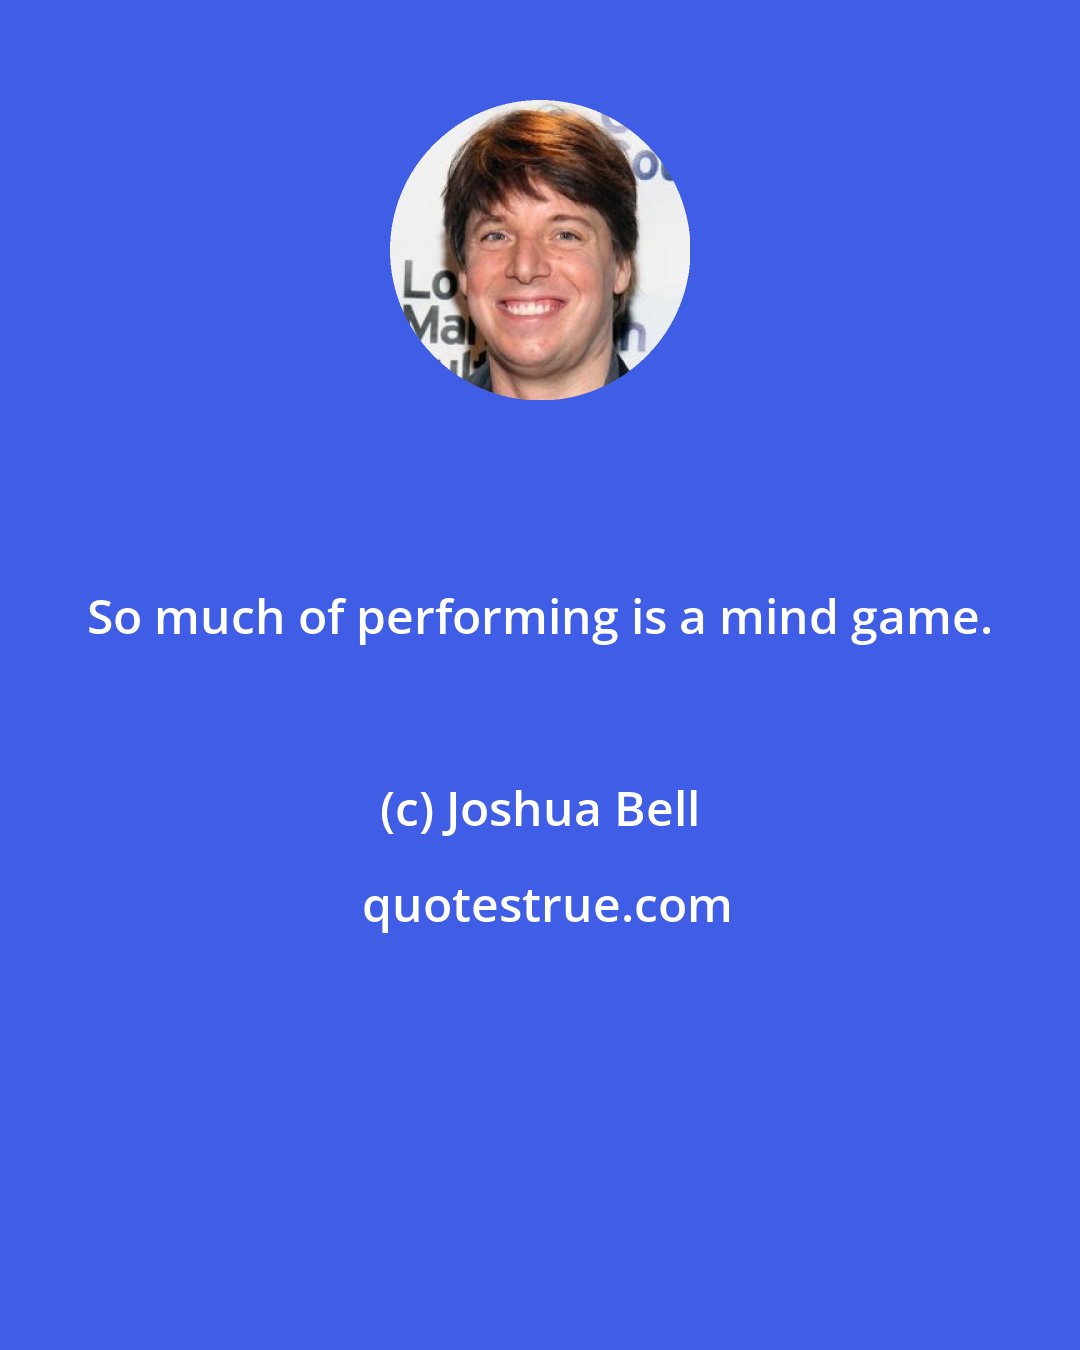 Joshua Bell: So much of performing is a mind game.